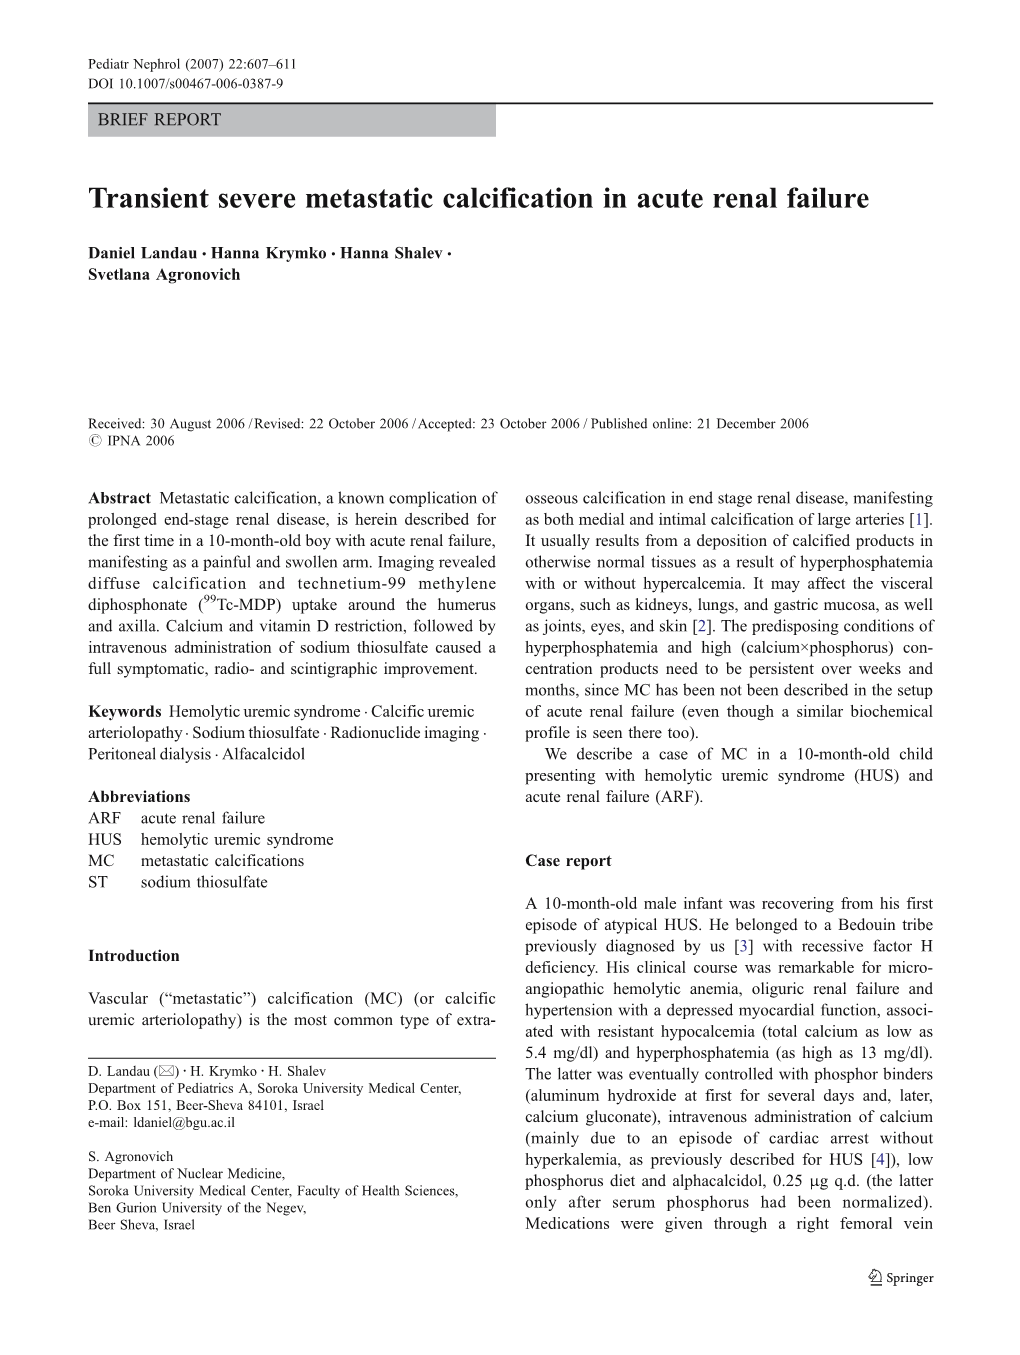 Transient Severe Metastatic Calcification in Acute Renal Failure